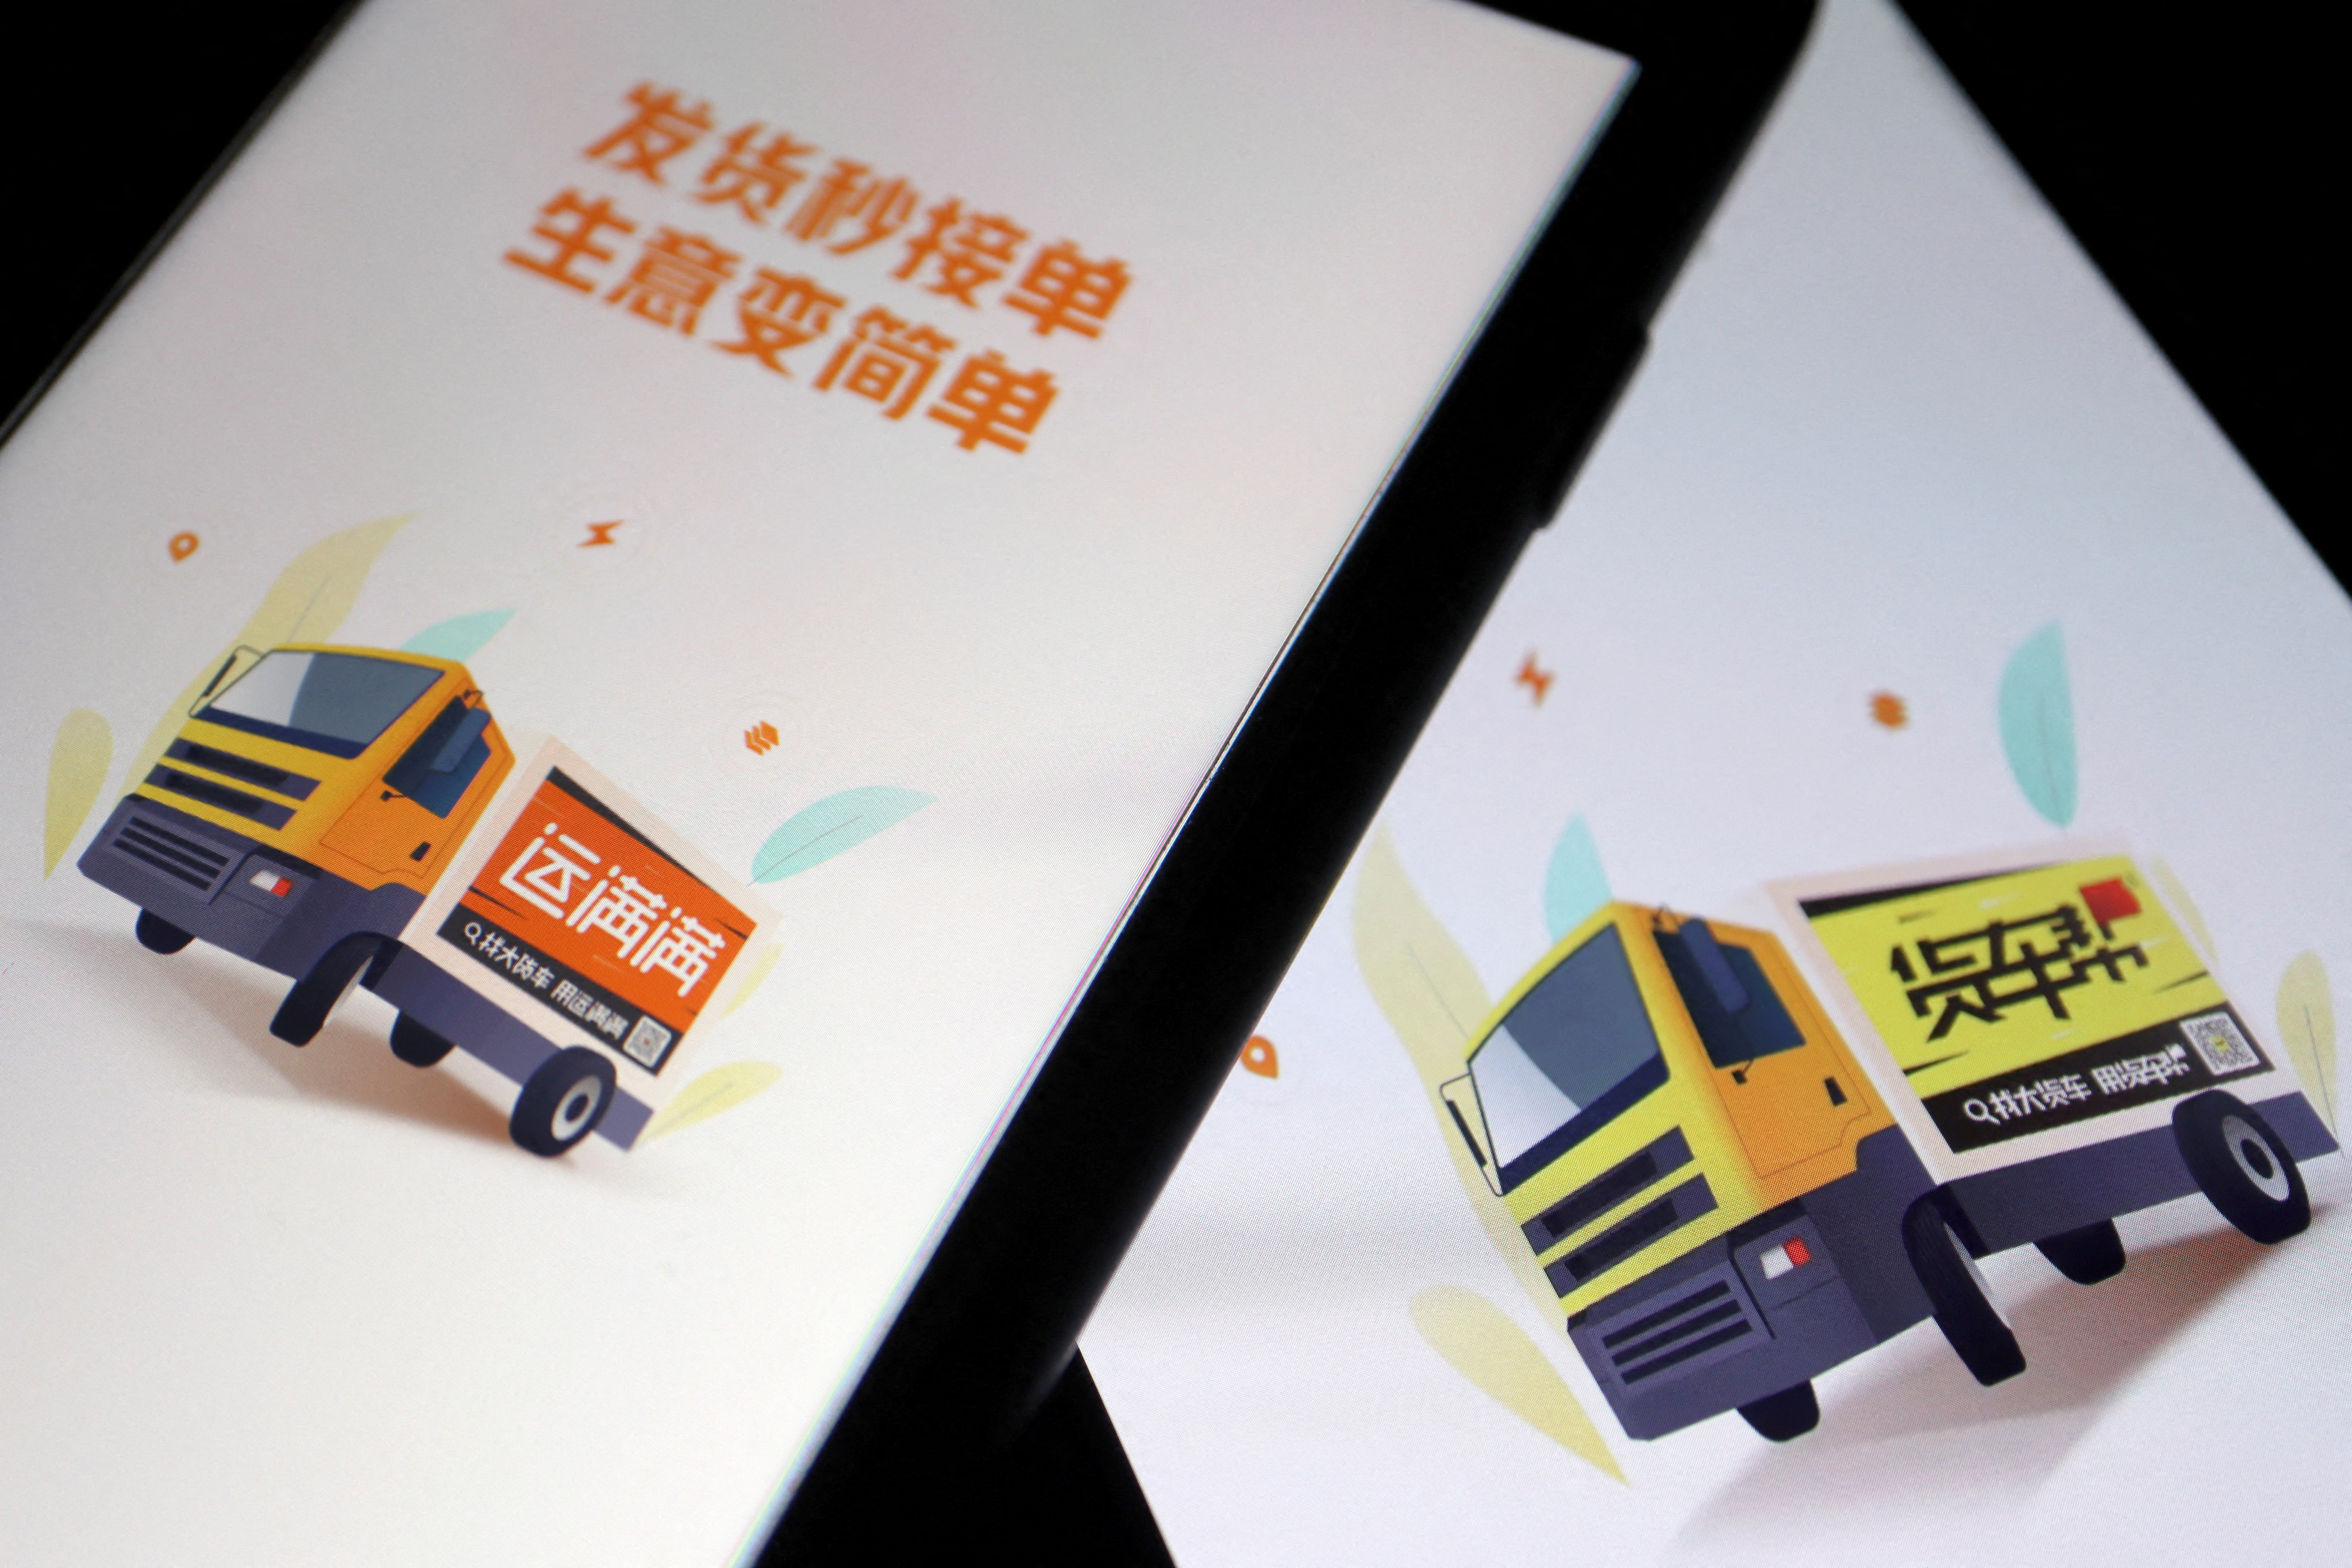 Chinese truck-hailing apps Huochebang and Yunmanman, owned by Full Truck Alliance, are seen on mobile phones in this illustration picture taken July 5, 2021. REUTERS/Florence Lo/Illustration/File Photo